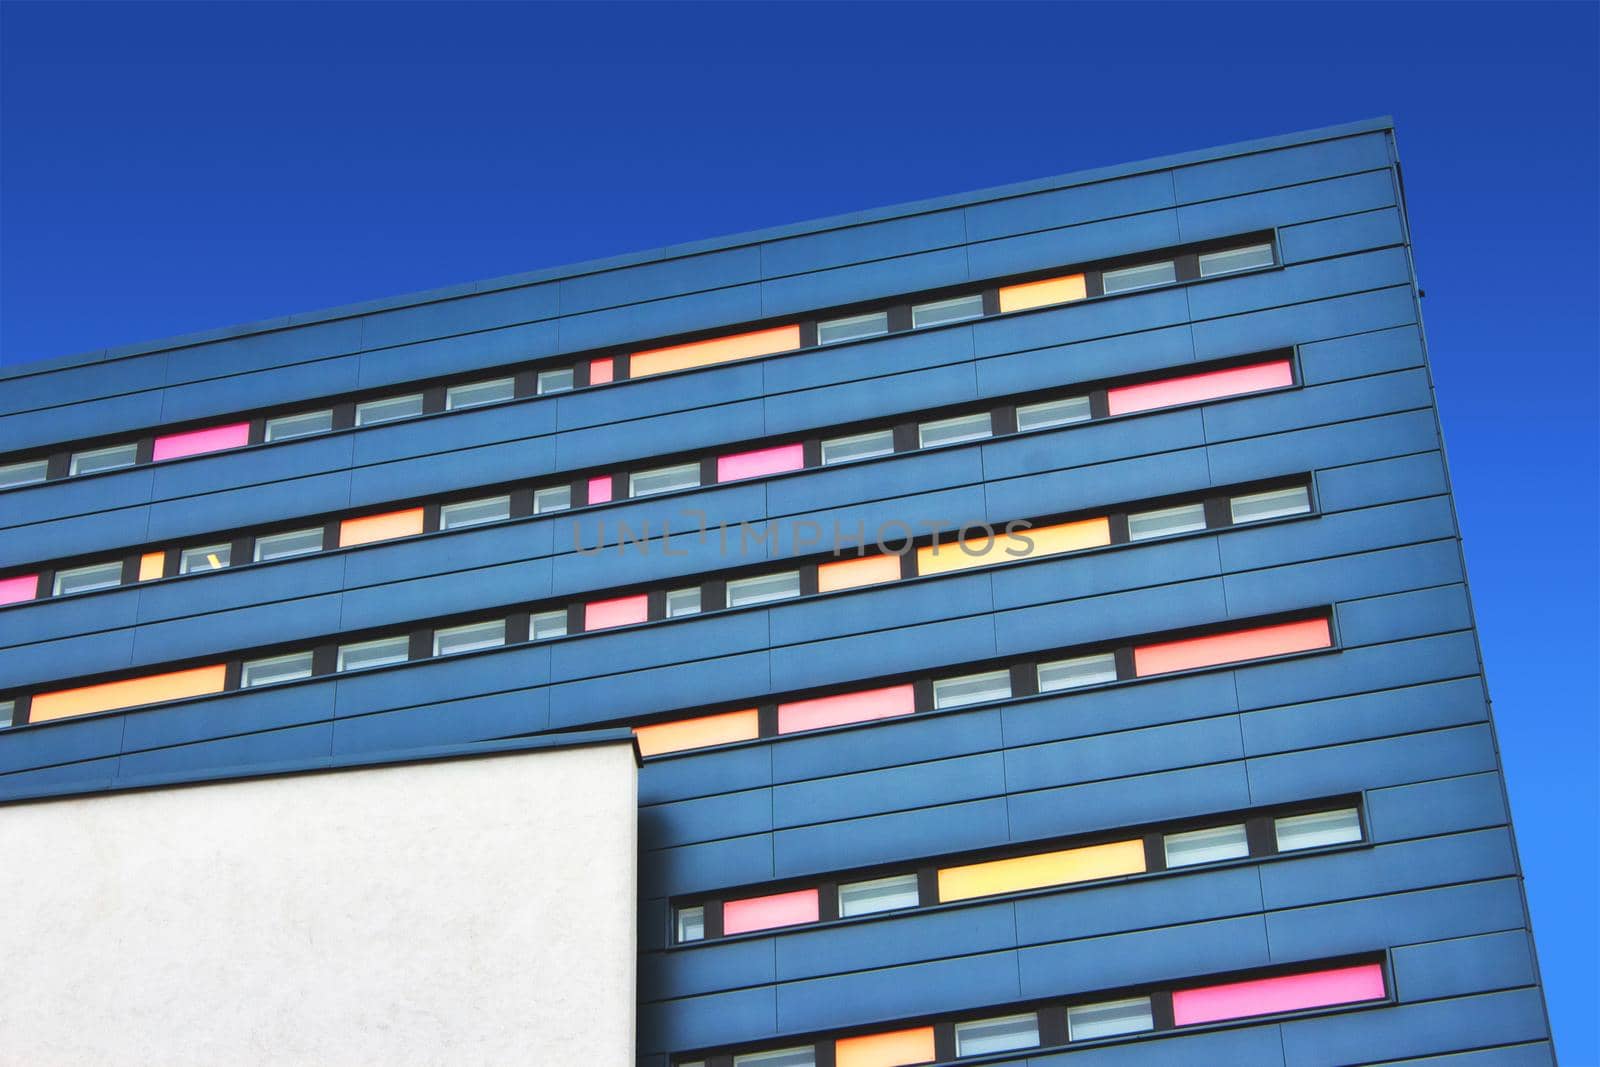 Modern design office block with colorful facade against a blue sky background